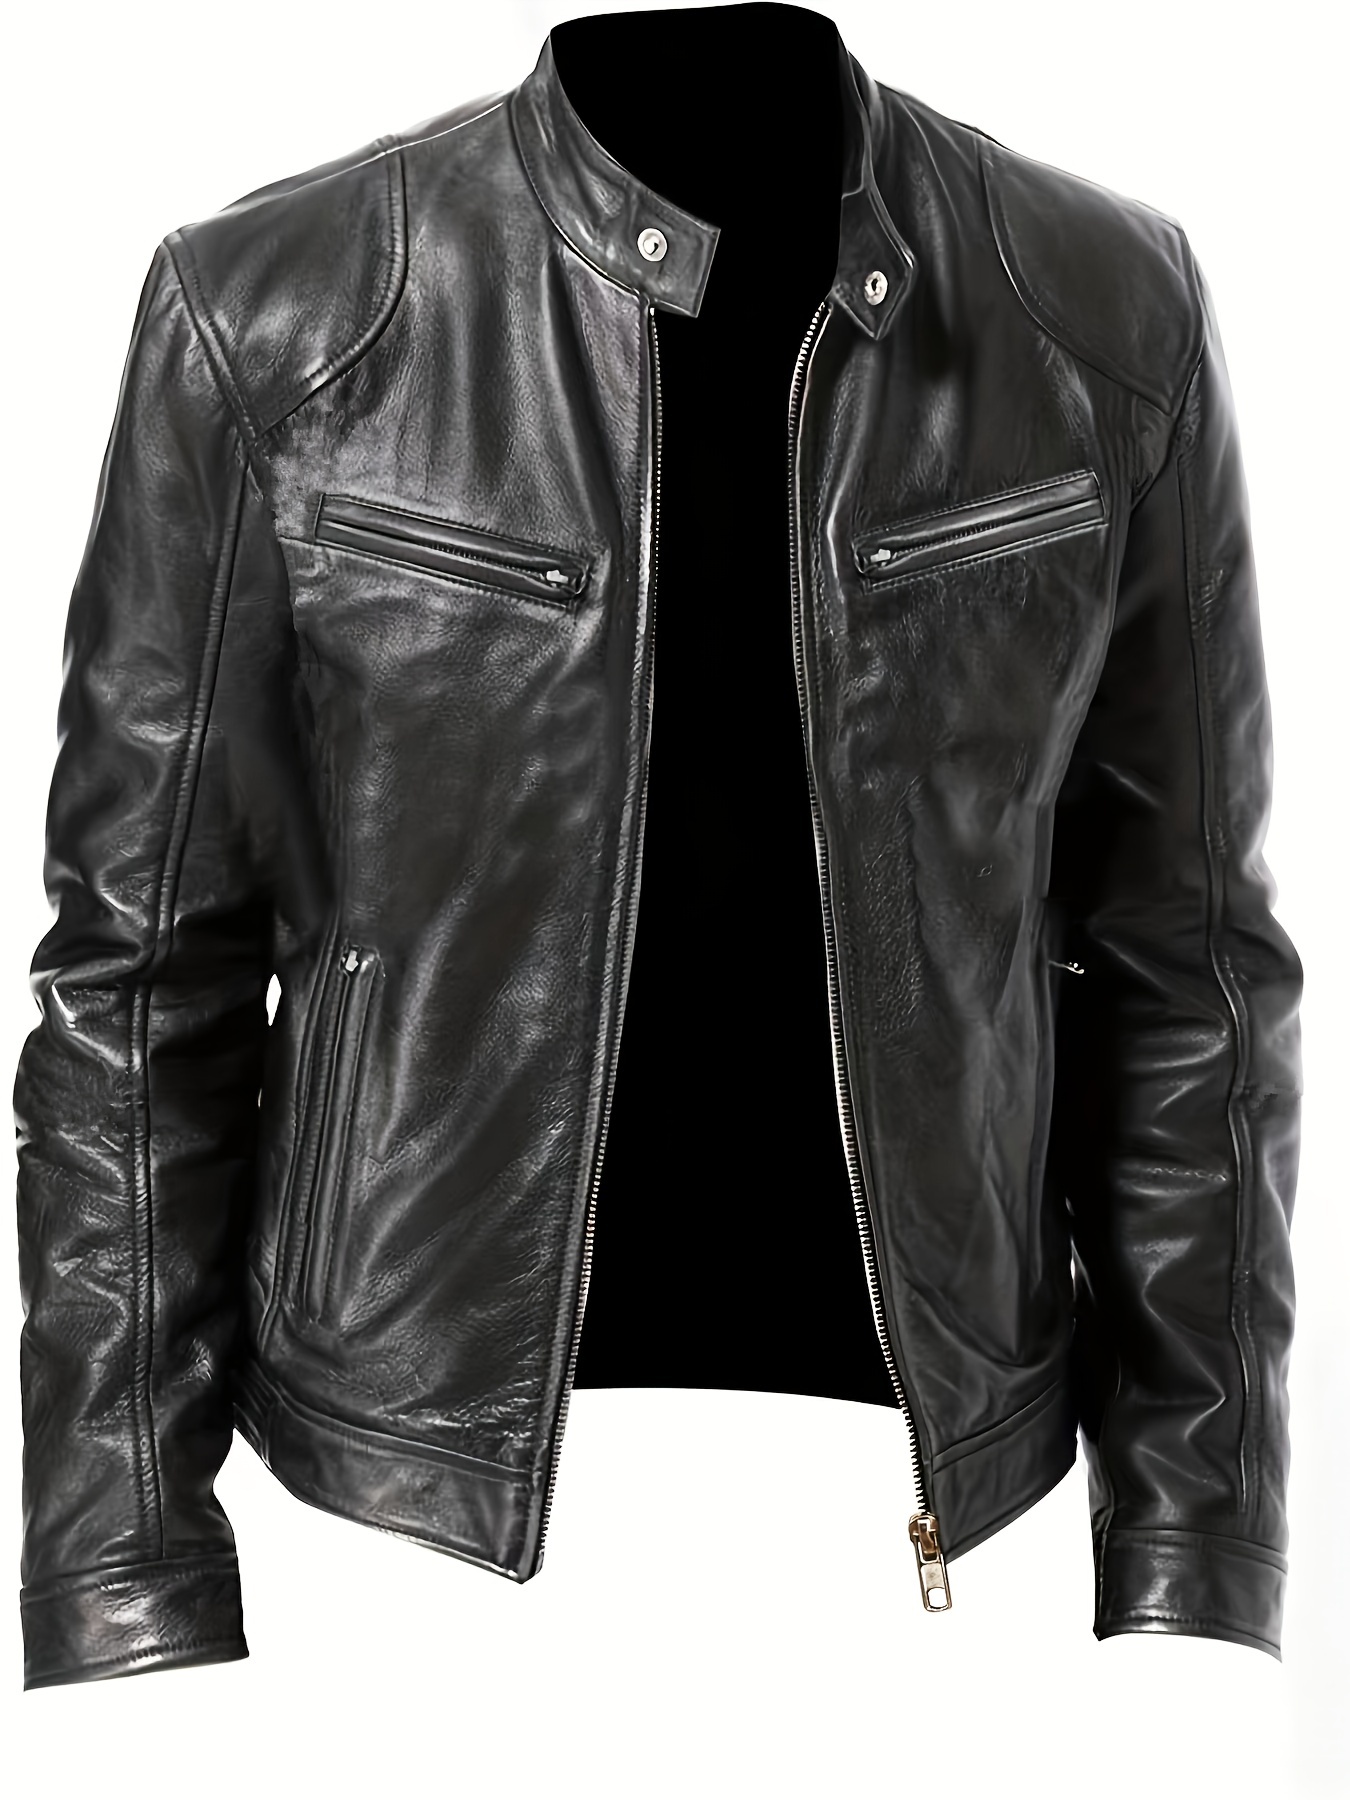 Men's Autumn and Winter PU Leather Jacket Full Zipper Stand Collar Motorcycle Bomber Jacket